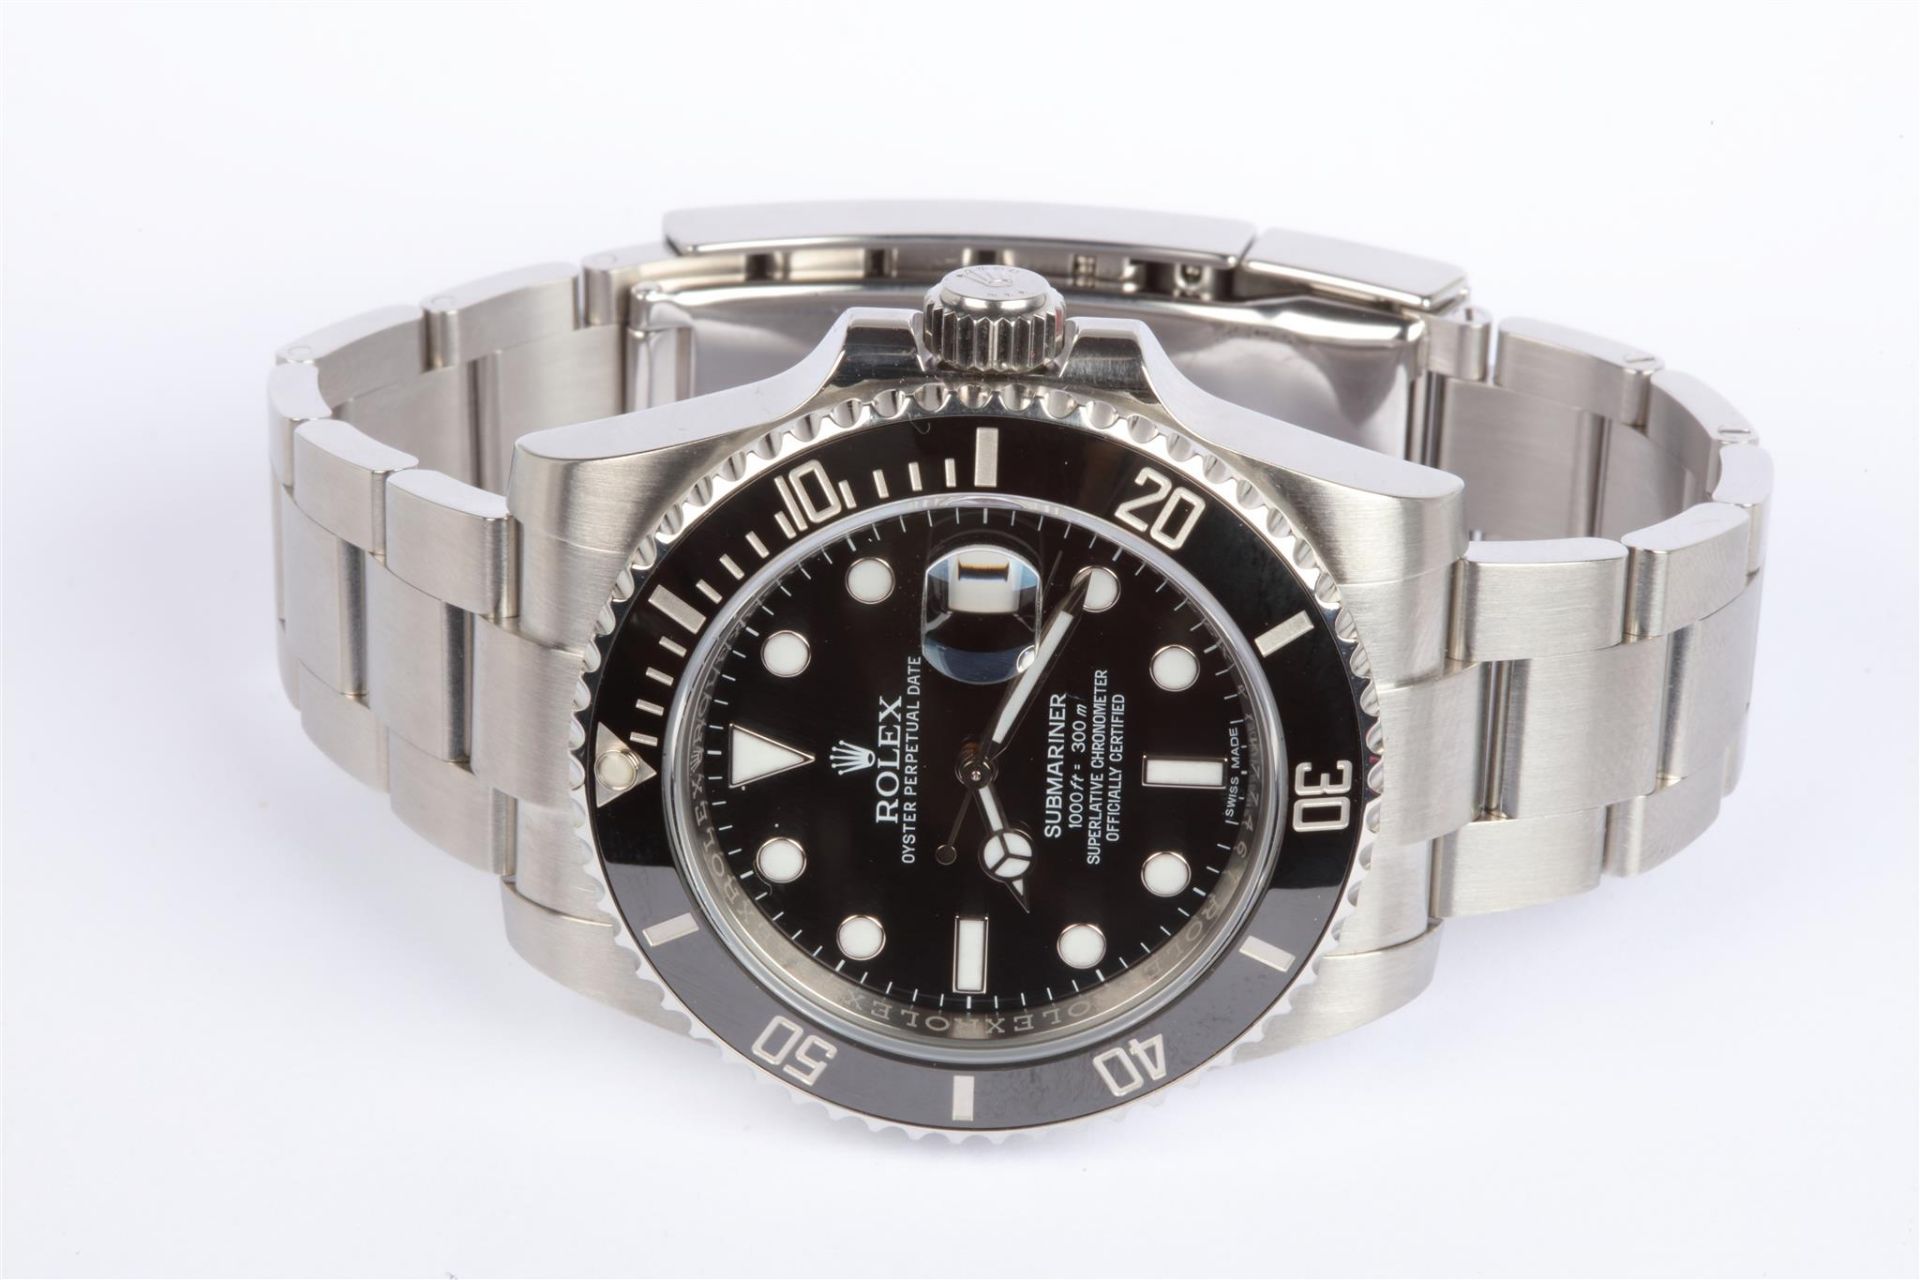 No VAT Gents Rolex 2016 Oyster Perpetual Date Submariner Watch - Boxed With Papers & International - Image 2 of 4